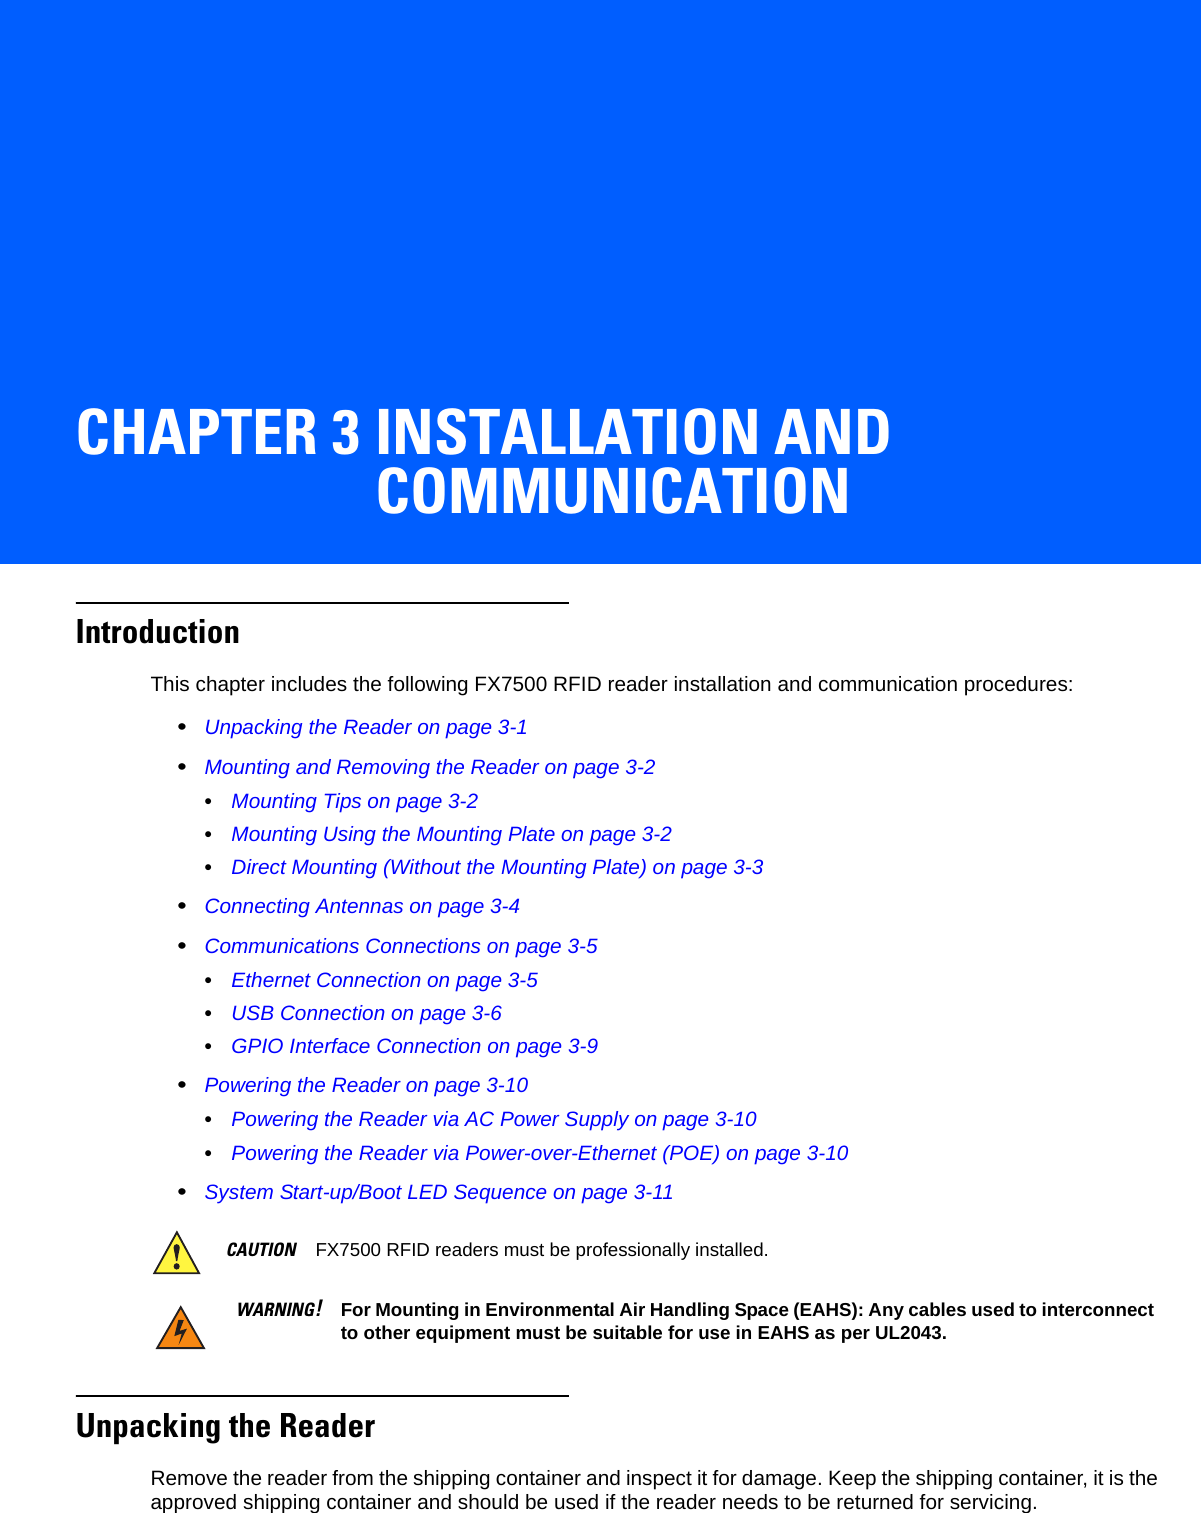 CHAPTER 3 INSTALLATION AND COMMUNICATIONIntroductionThis chapter includes the following FX7500 RFID reader installation and communication procedures:•Unpacking the Reader on page 3-1•Mounting and Removing the Reader on page 3-2•Mounting Tips on page 3-2•Mounting Using the Mounting Plate on page 3-2•Direct Mounting (Without the Mounting Plate) on page 3-3•Connecting Antennas on page 3-4•Communications Connections on page 3-5•Ethernet Connection on page 3-5•USB Connection on page 3-6•GPIO Interface Connection on page 3-9•Powering the Reader on page 3-10•Powering the Reader via AC Power Supply on page 3-10•Powering the Reader via Power-over-Ethernet (POE) on page 3-10•System Start-up/Boot LED Sequence on page 3-11Unpacking the ReaderRemove the reader from the shipping container and inspect it for damage. Keep the shipping container, it is the approved shipping container and should be used if the reader needs to be returned for servicing.CAUTION FX7500 RFID readers must be professionally installed.WARNING!For Mounting in Environmental Air Handling Space (EAHS): Any cables used to interconnect to other equipment must be suitable for use in EAHS as per UL2043.